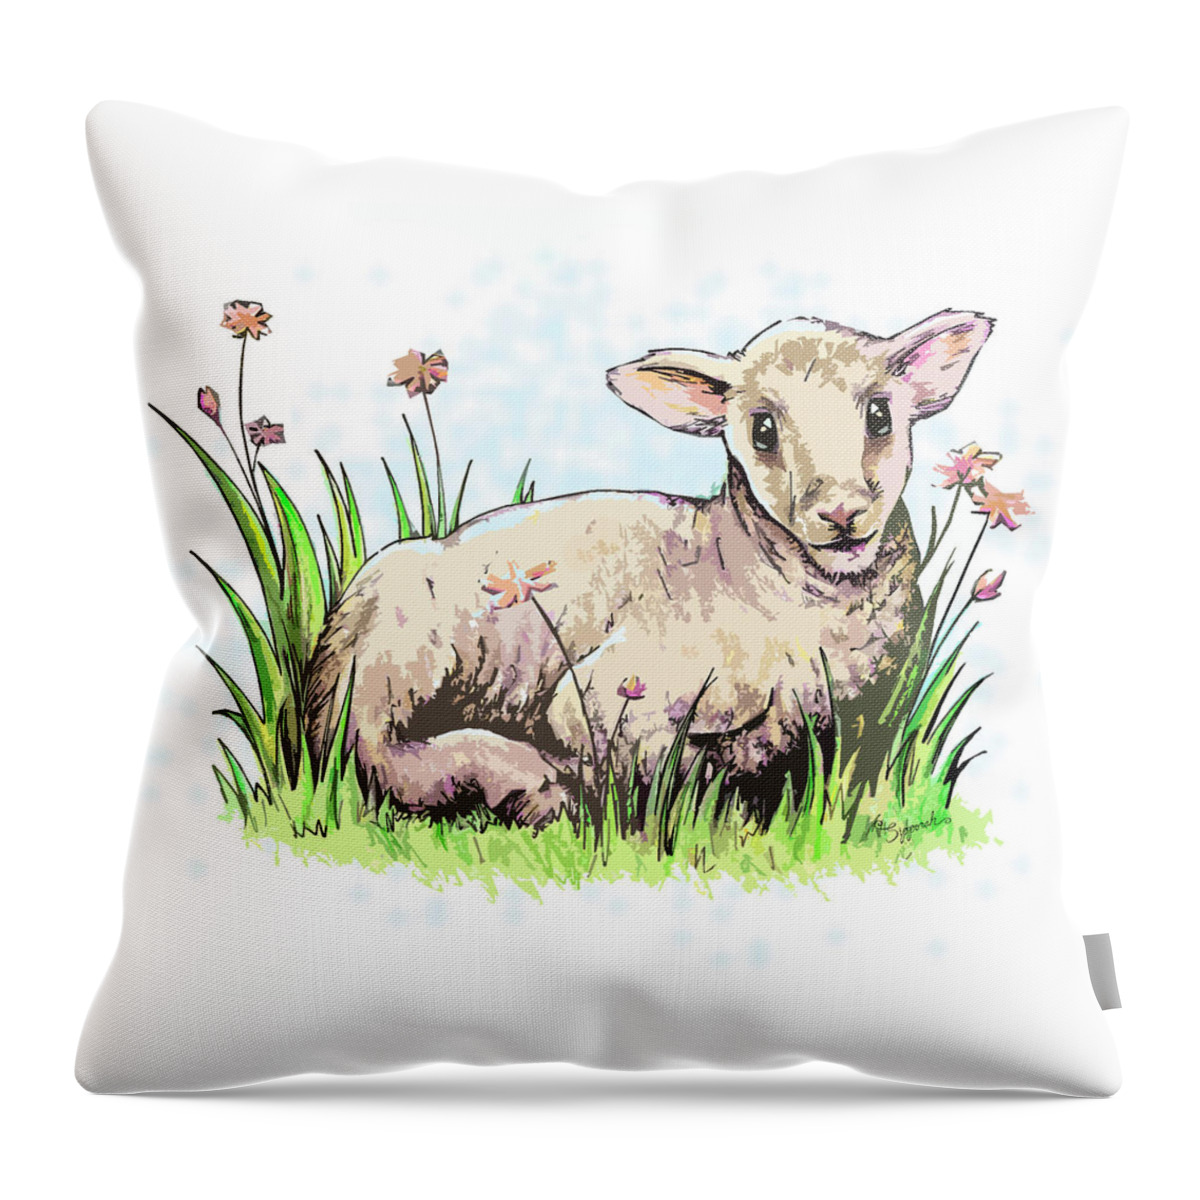 Yearling Throw Pillow featuring the drawing The Yearling by Sipporah Art and Illustration